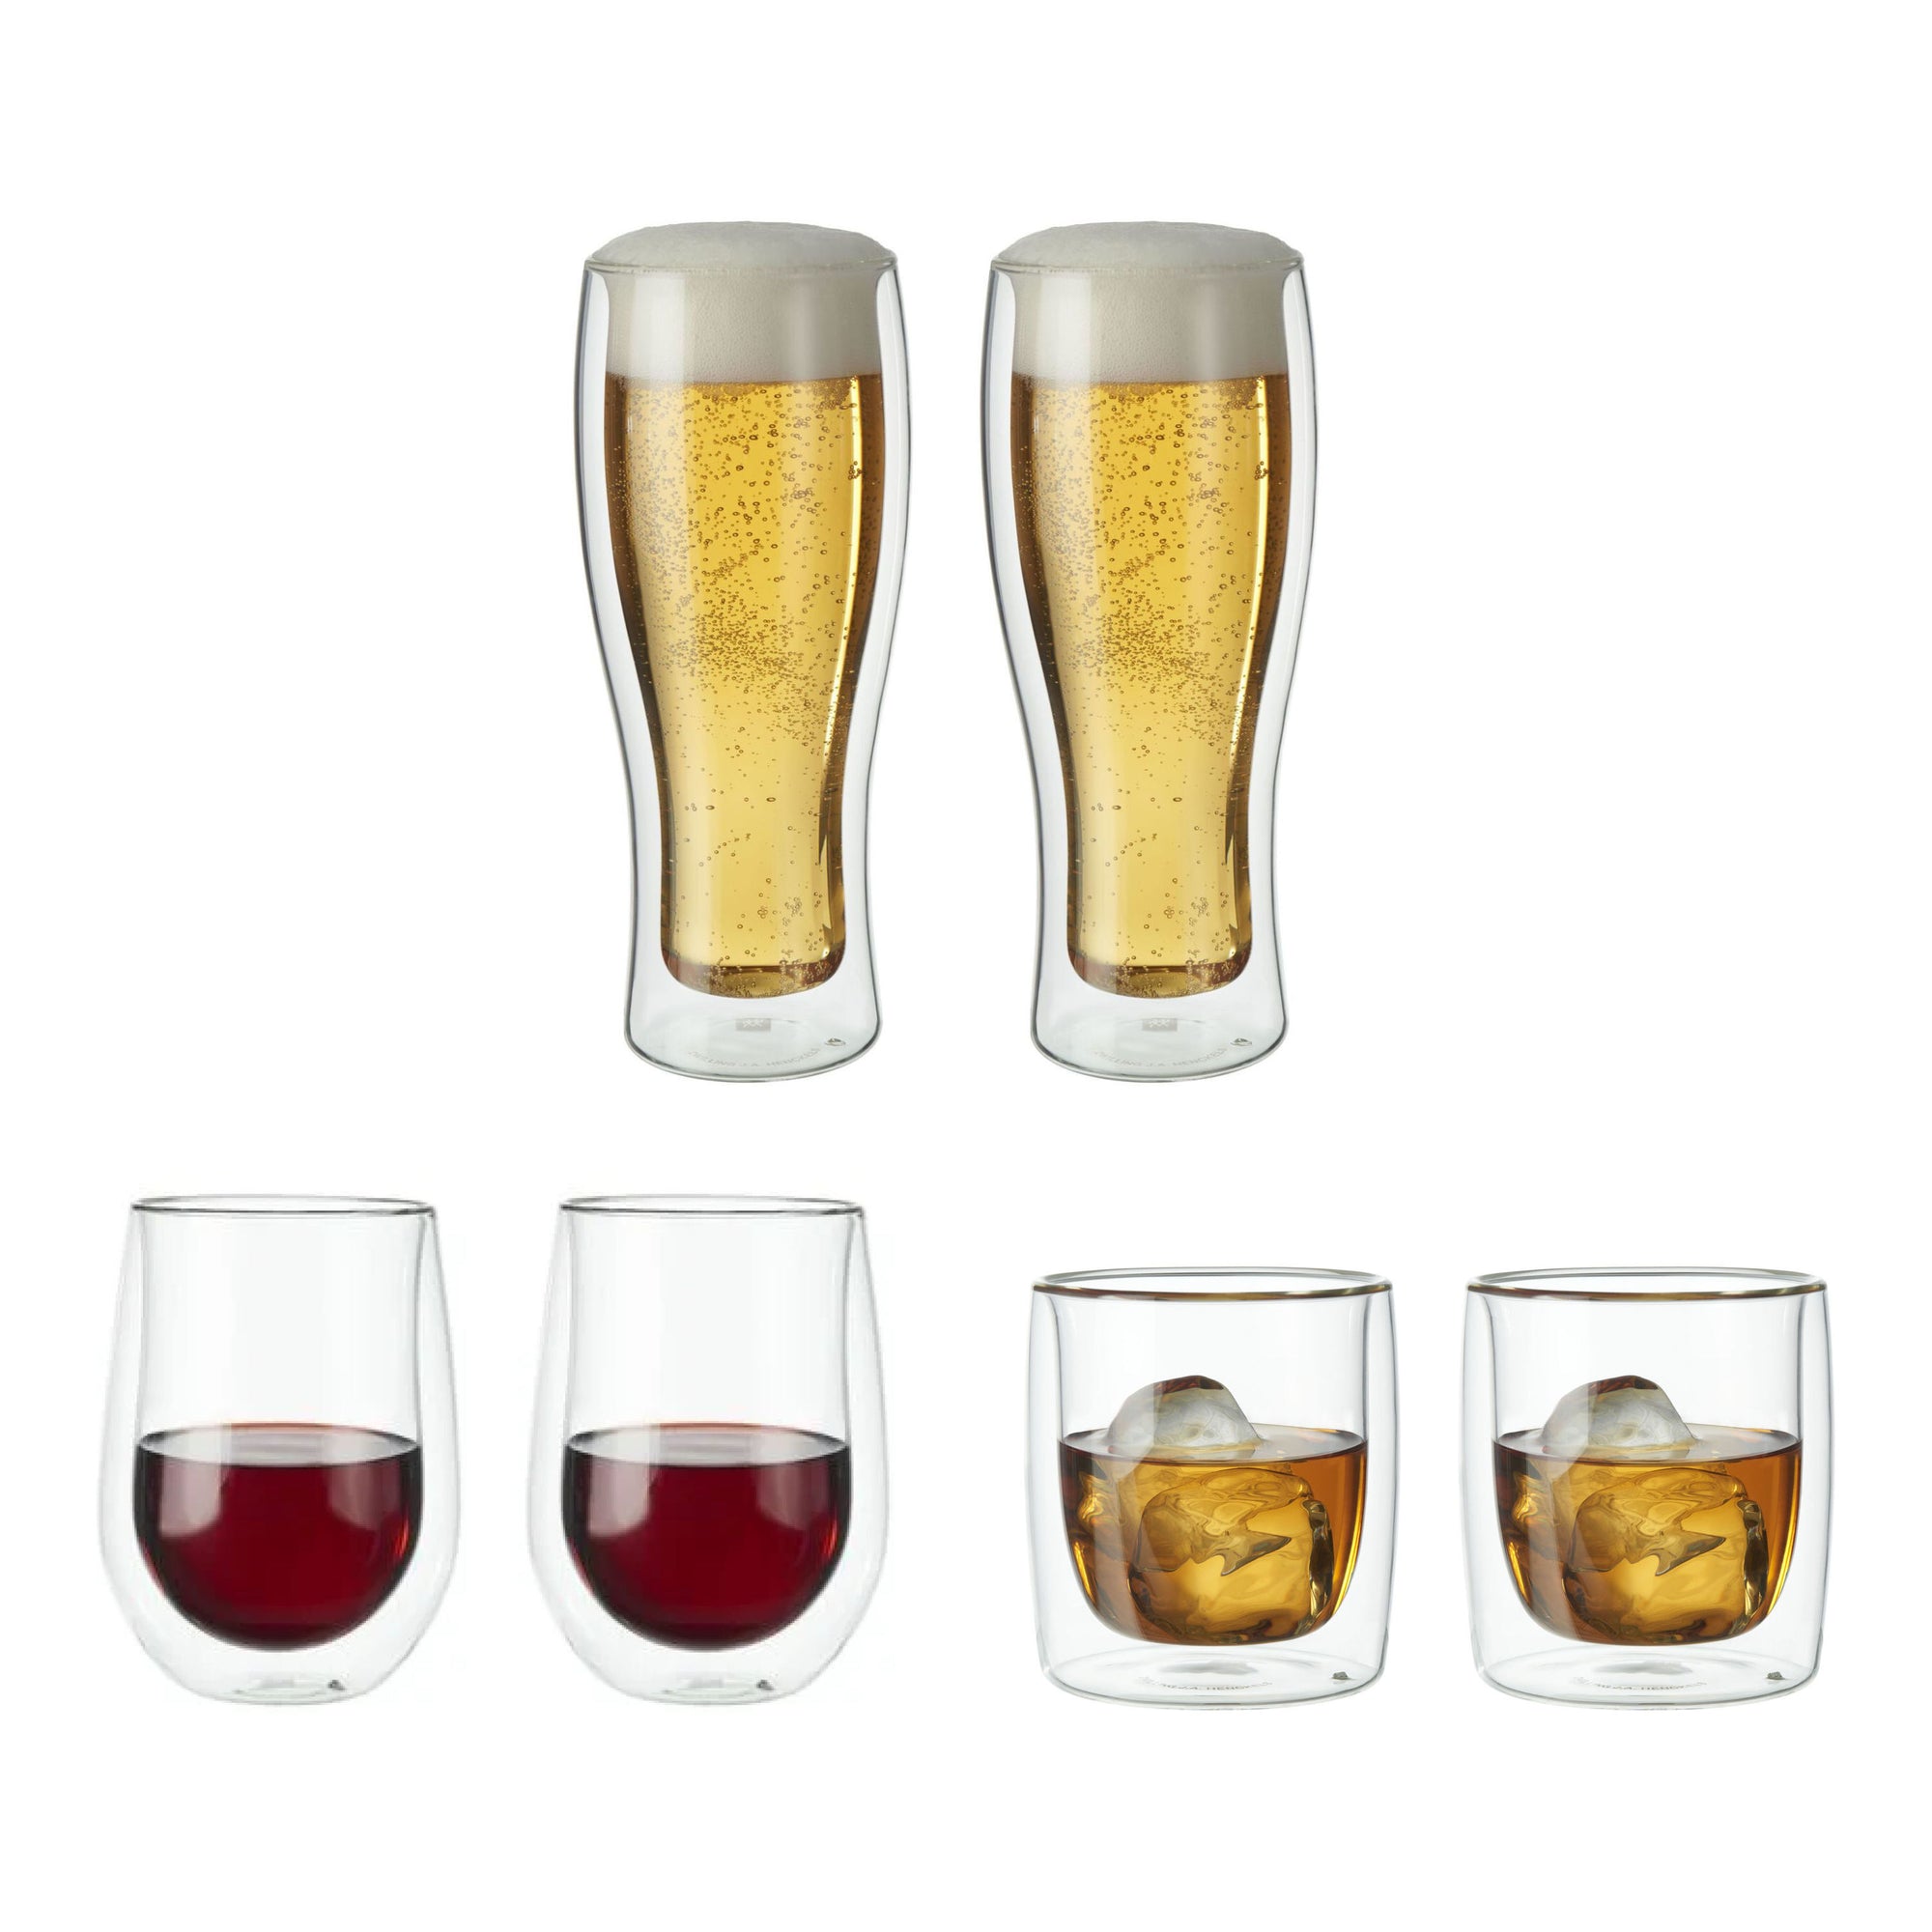 ZWILLING 6pc Entertaining Glass Set, Sorrento Double Wall Glassware Series